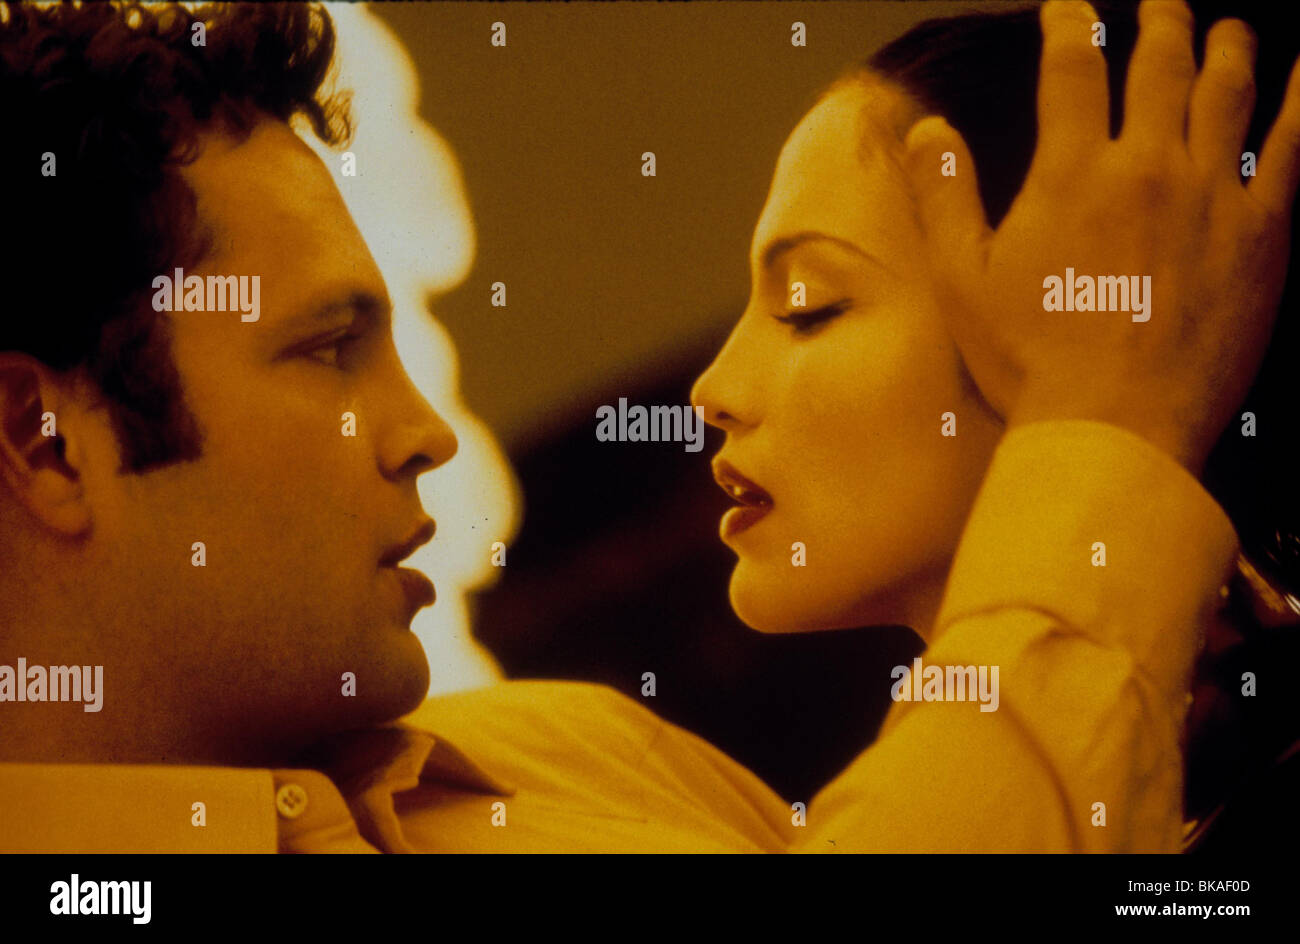 THE CELL (2000) VINCE VAUGHN, JENNIFER LOPEZ CELL 082 Stock Photo